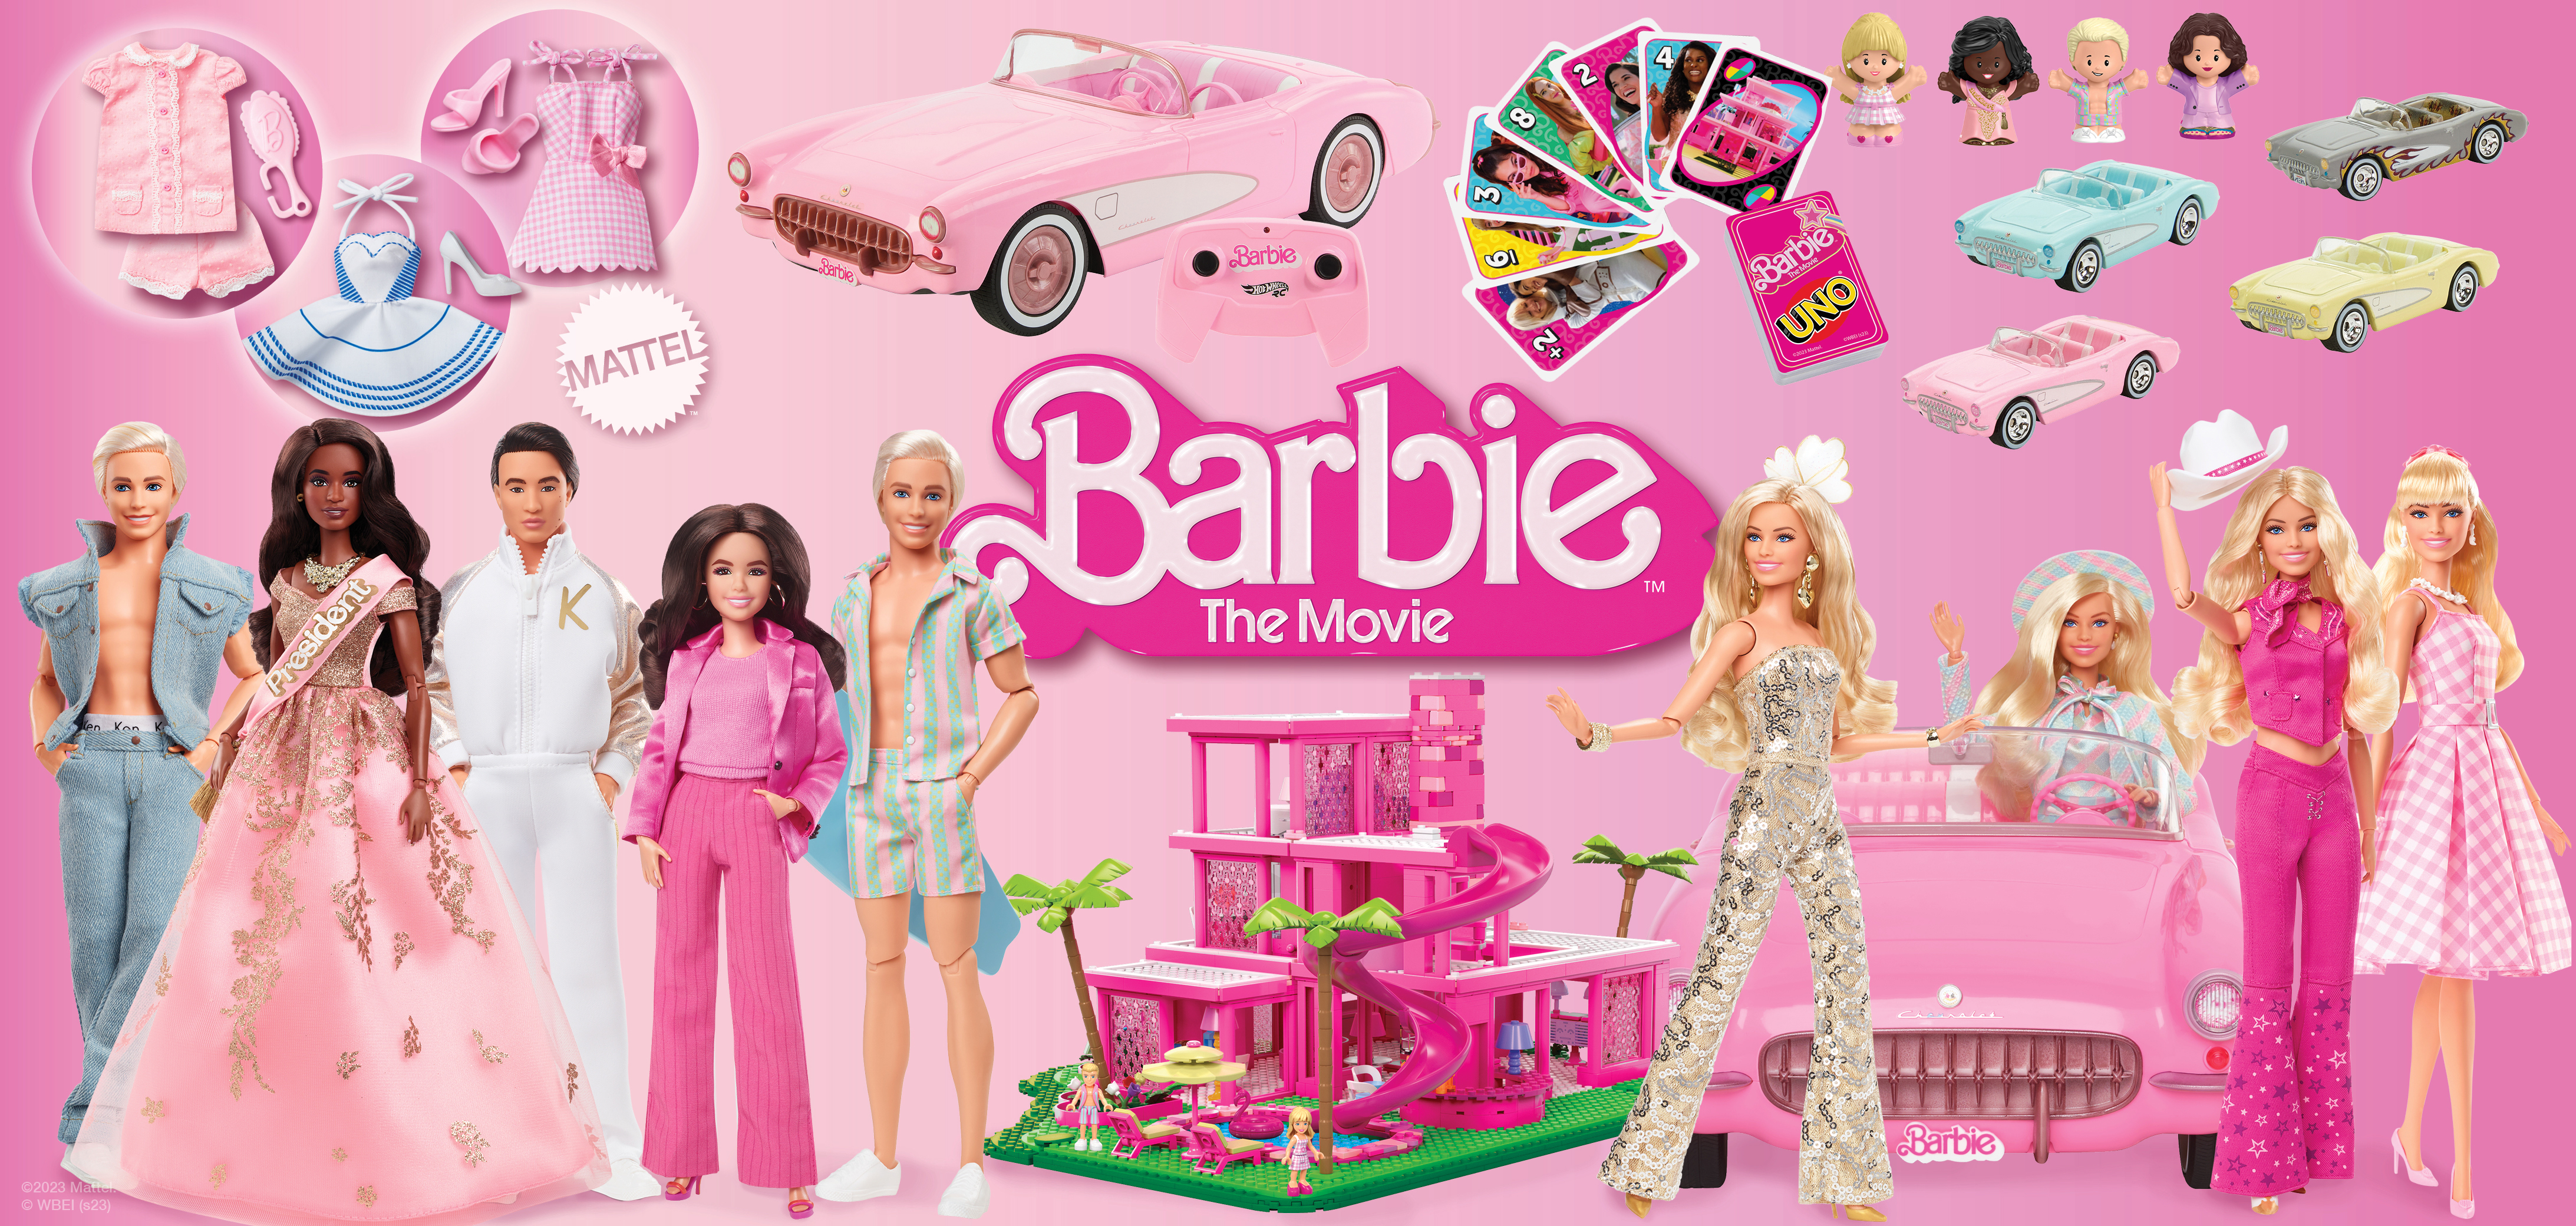 Iconic Barbie fashion comes alive in vintage collaboration